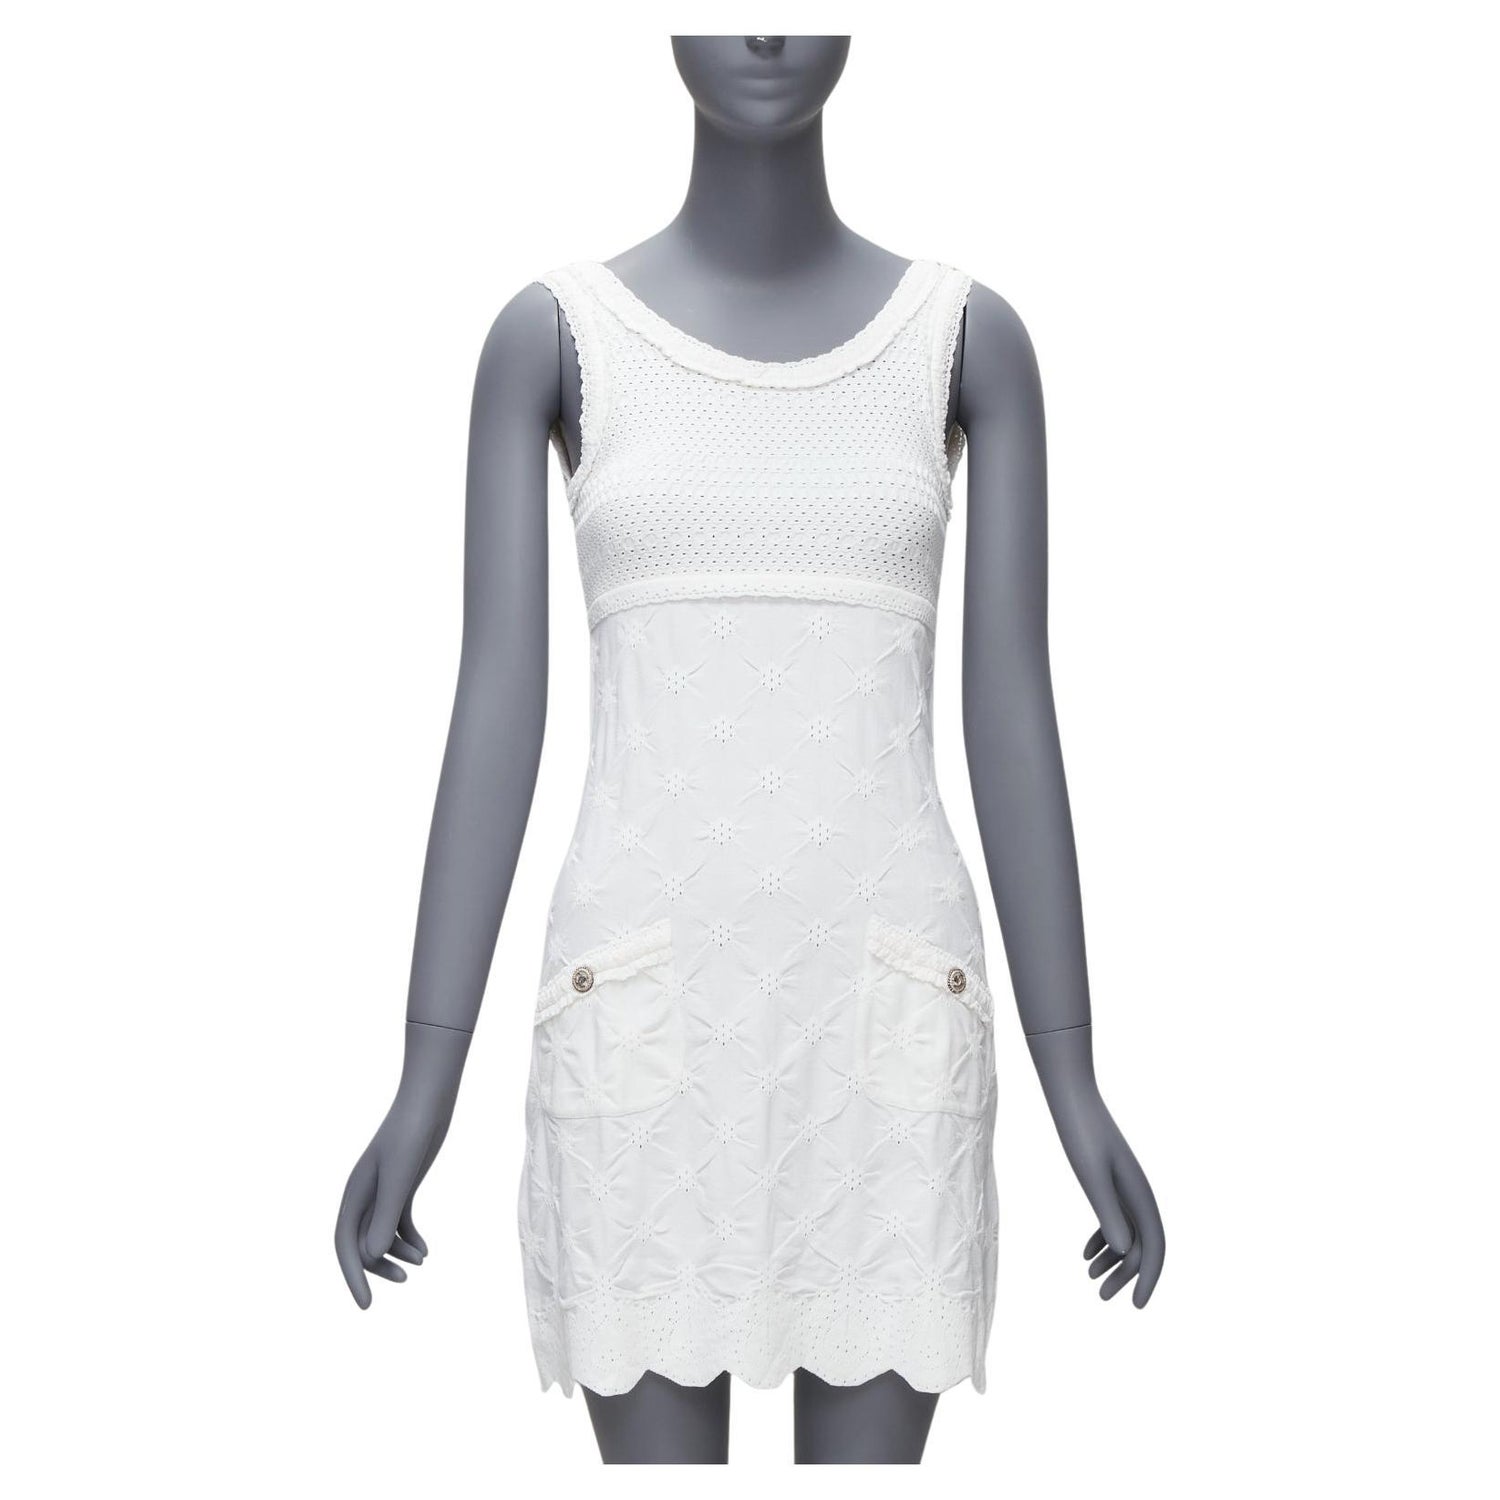 Chanel White Lace Dress - 12 For Sale on 1stDibs